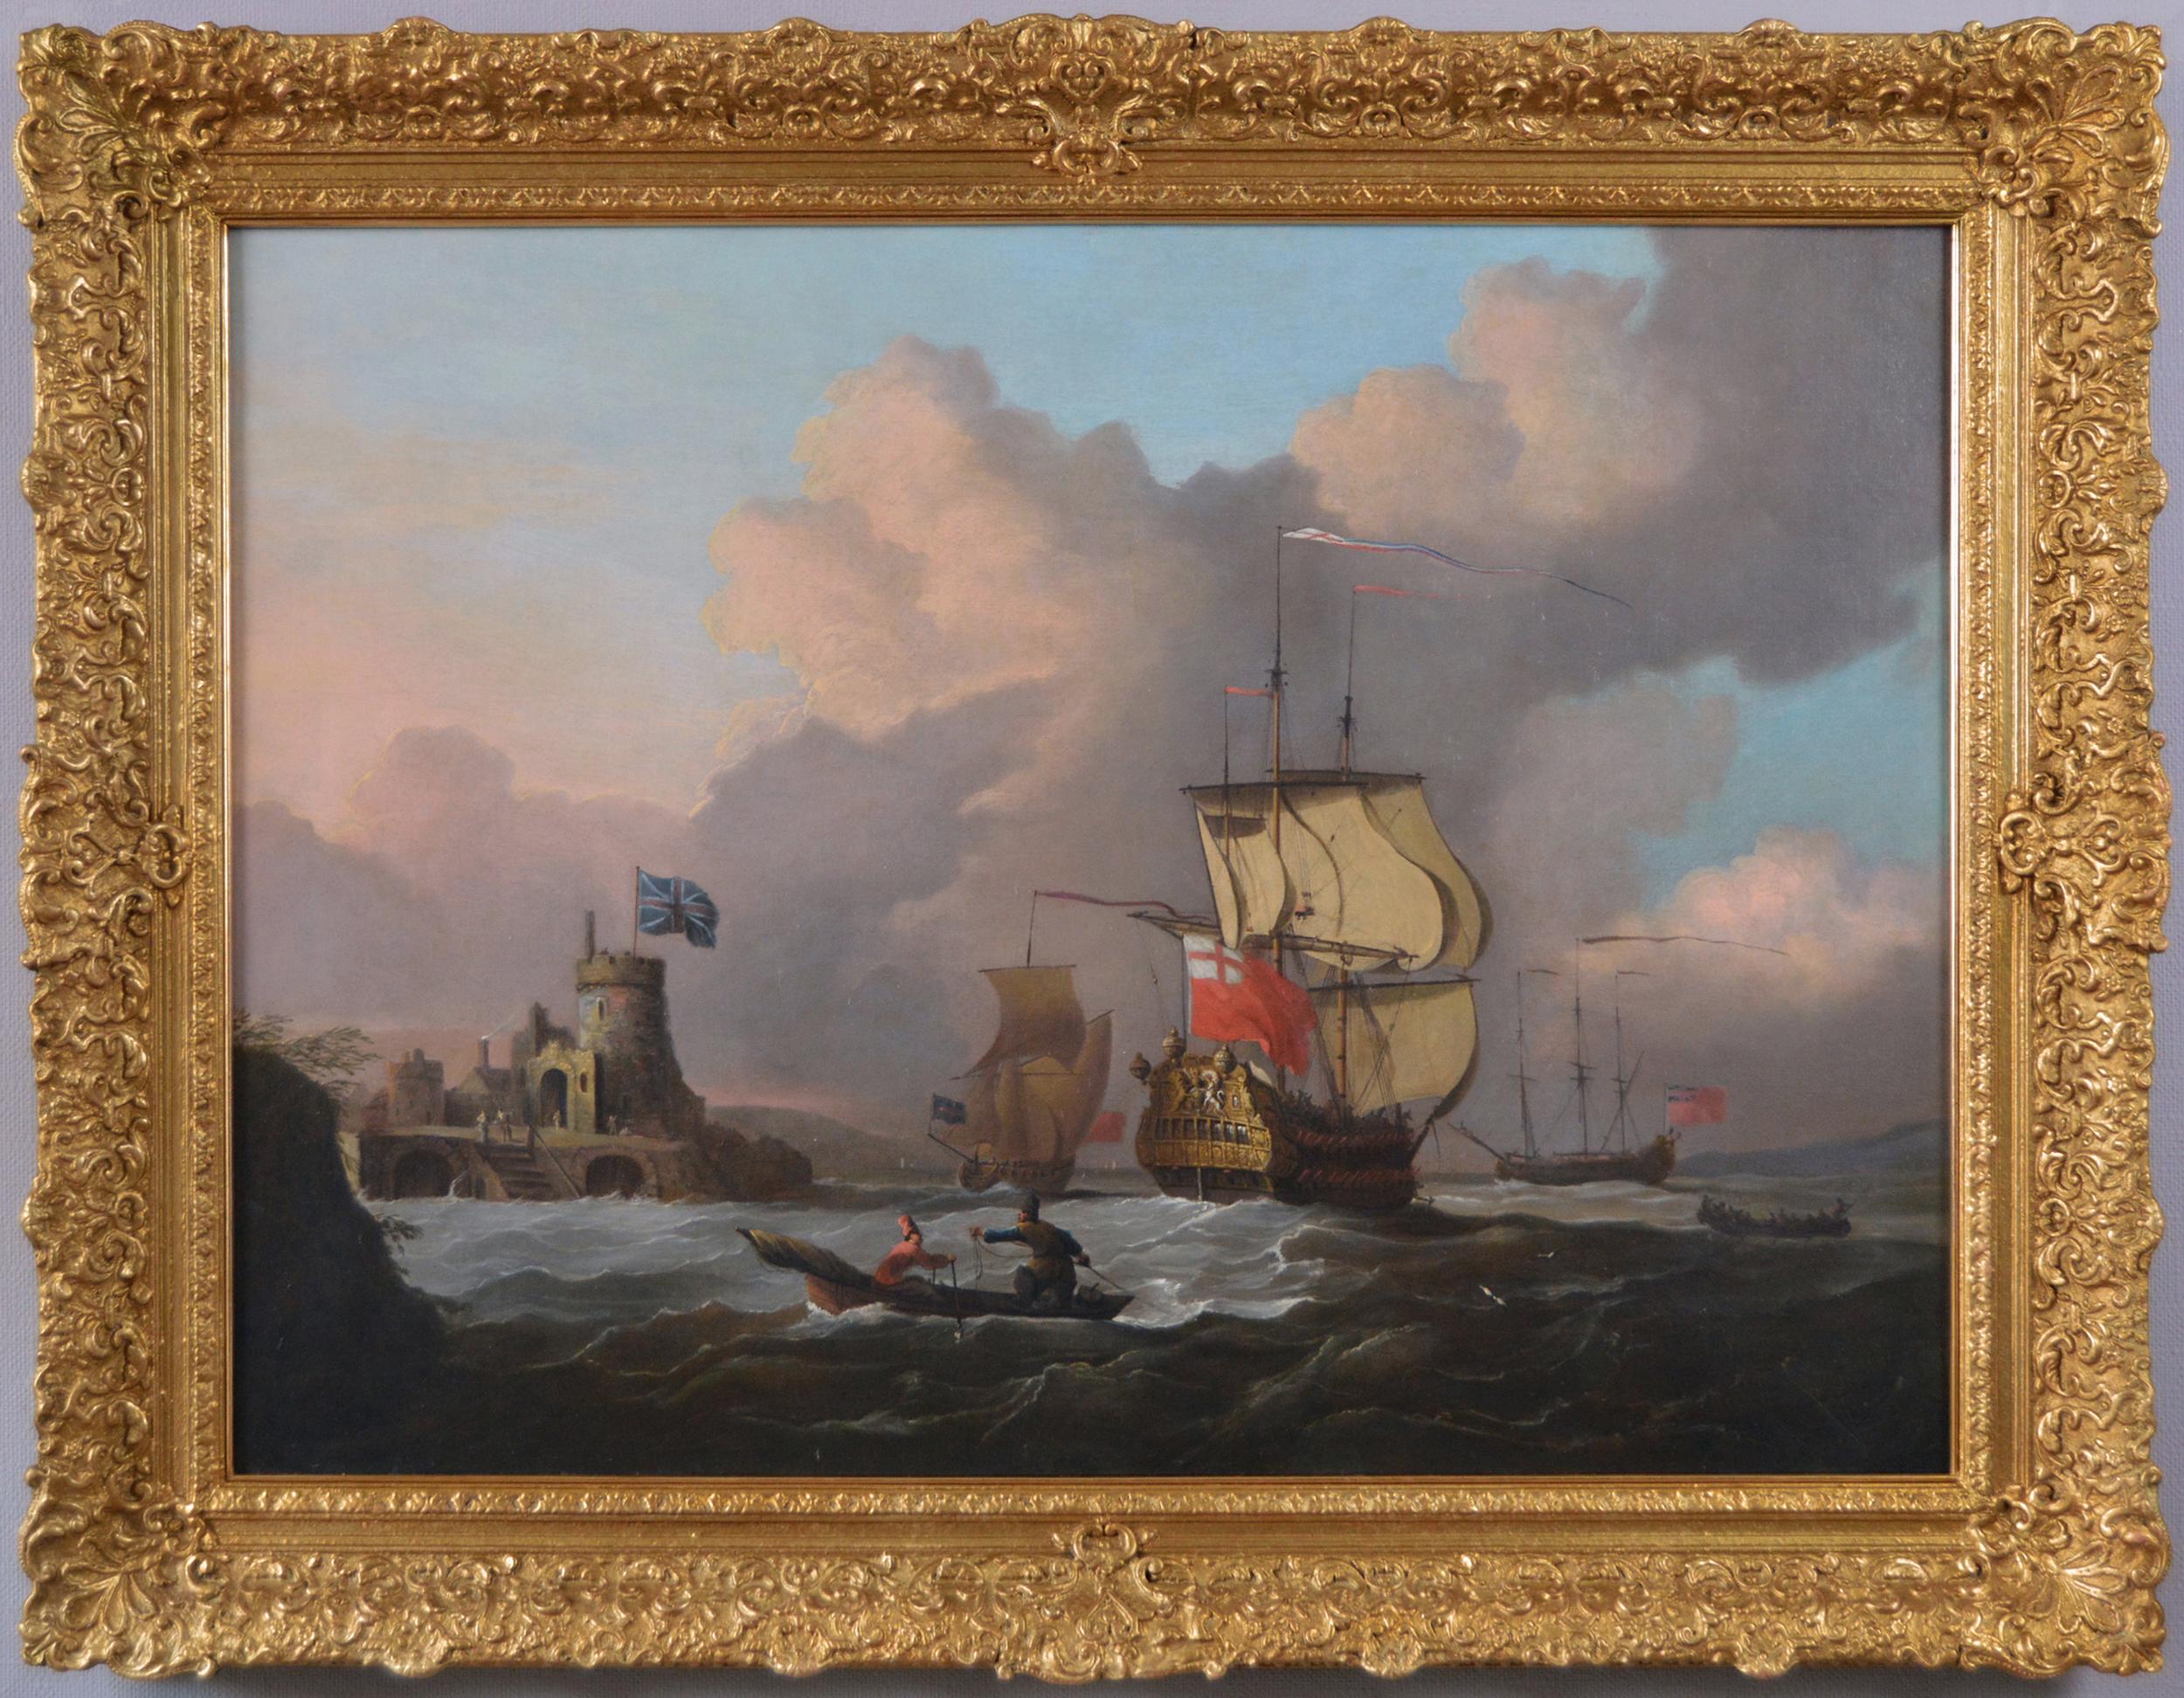 Peter Monamy Landscape Painting - 18th Century seascape oil painting of English naval ships & boats off a coast